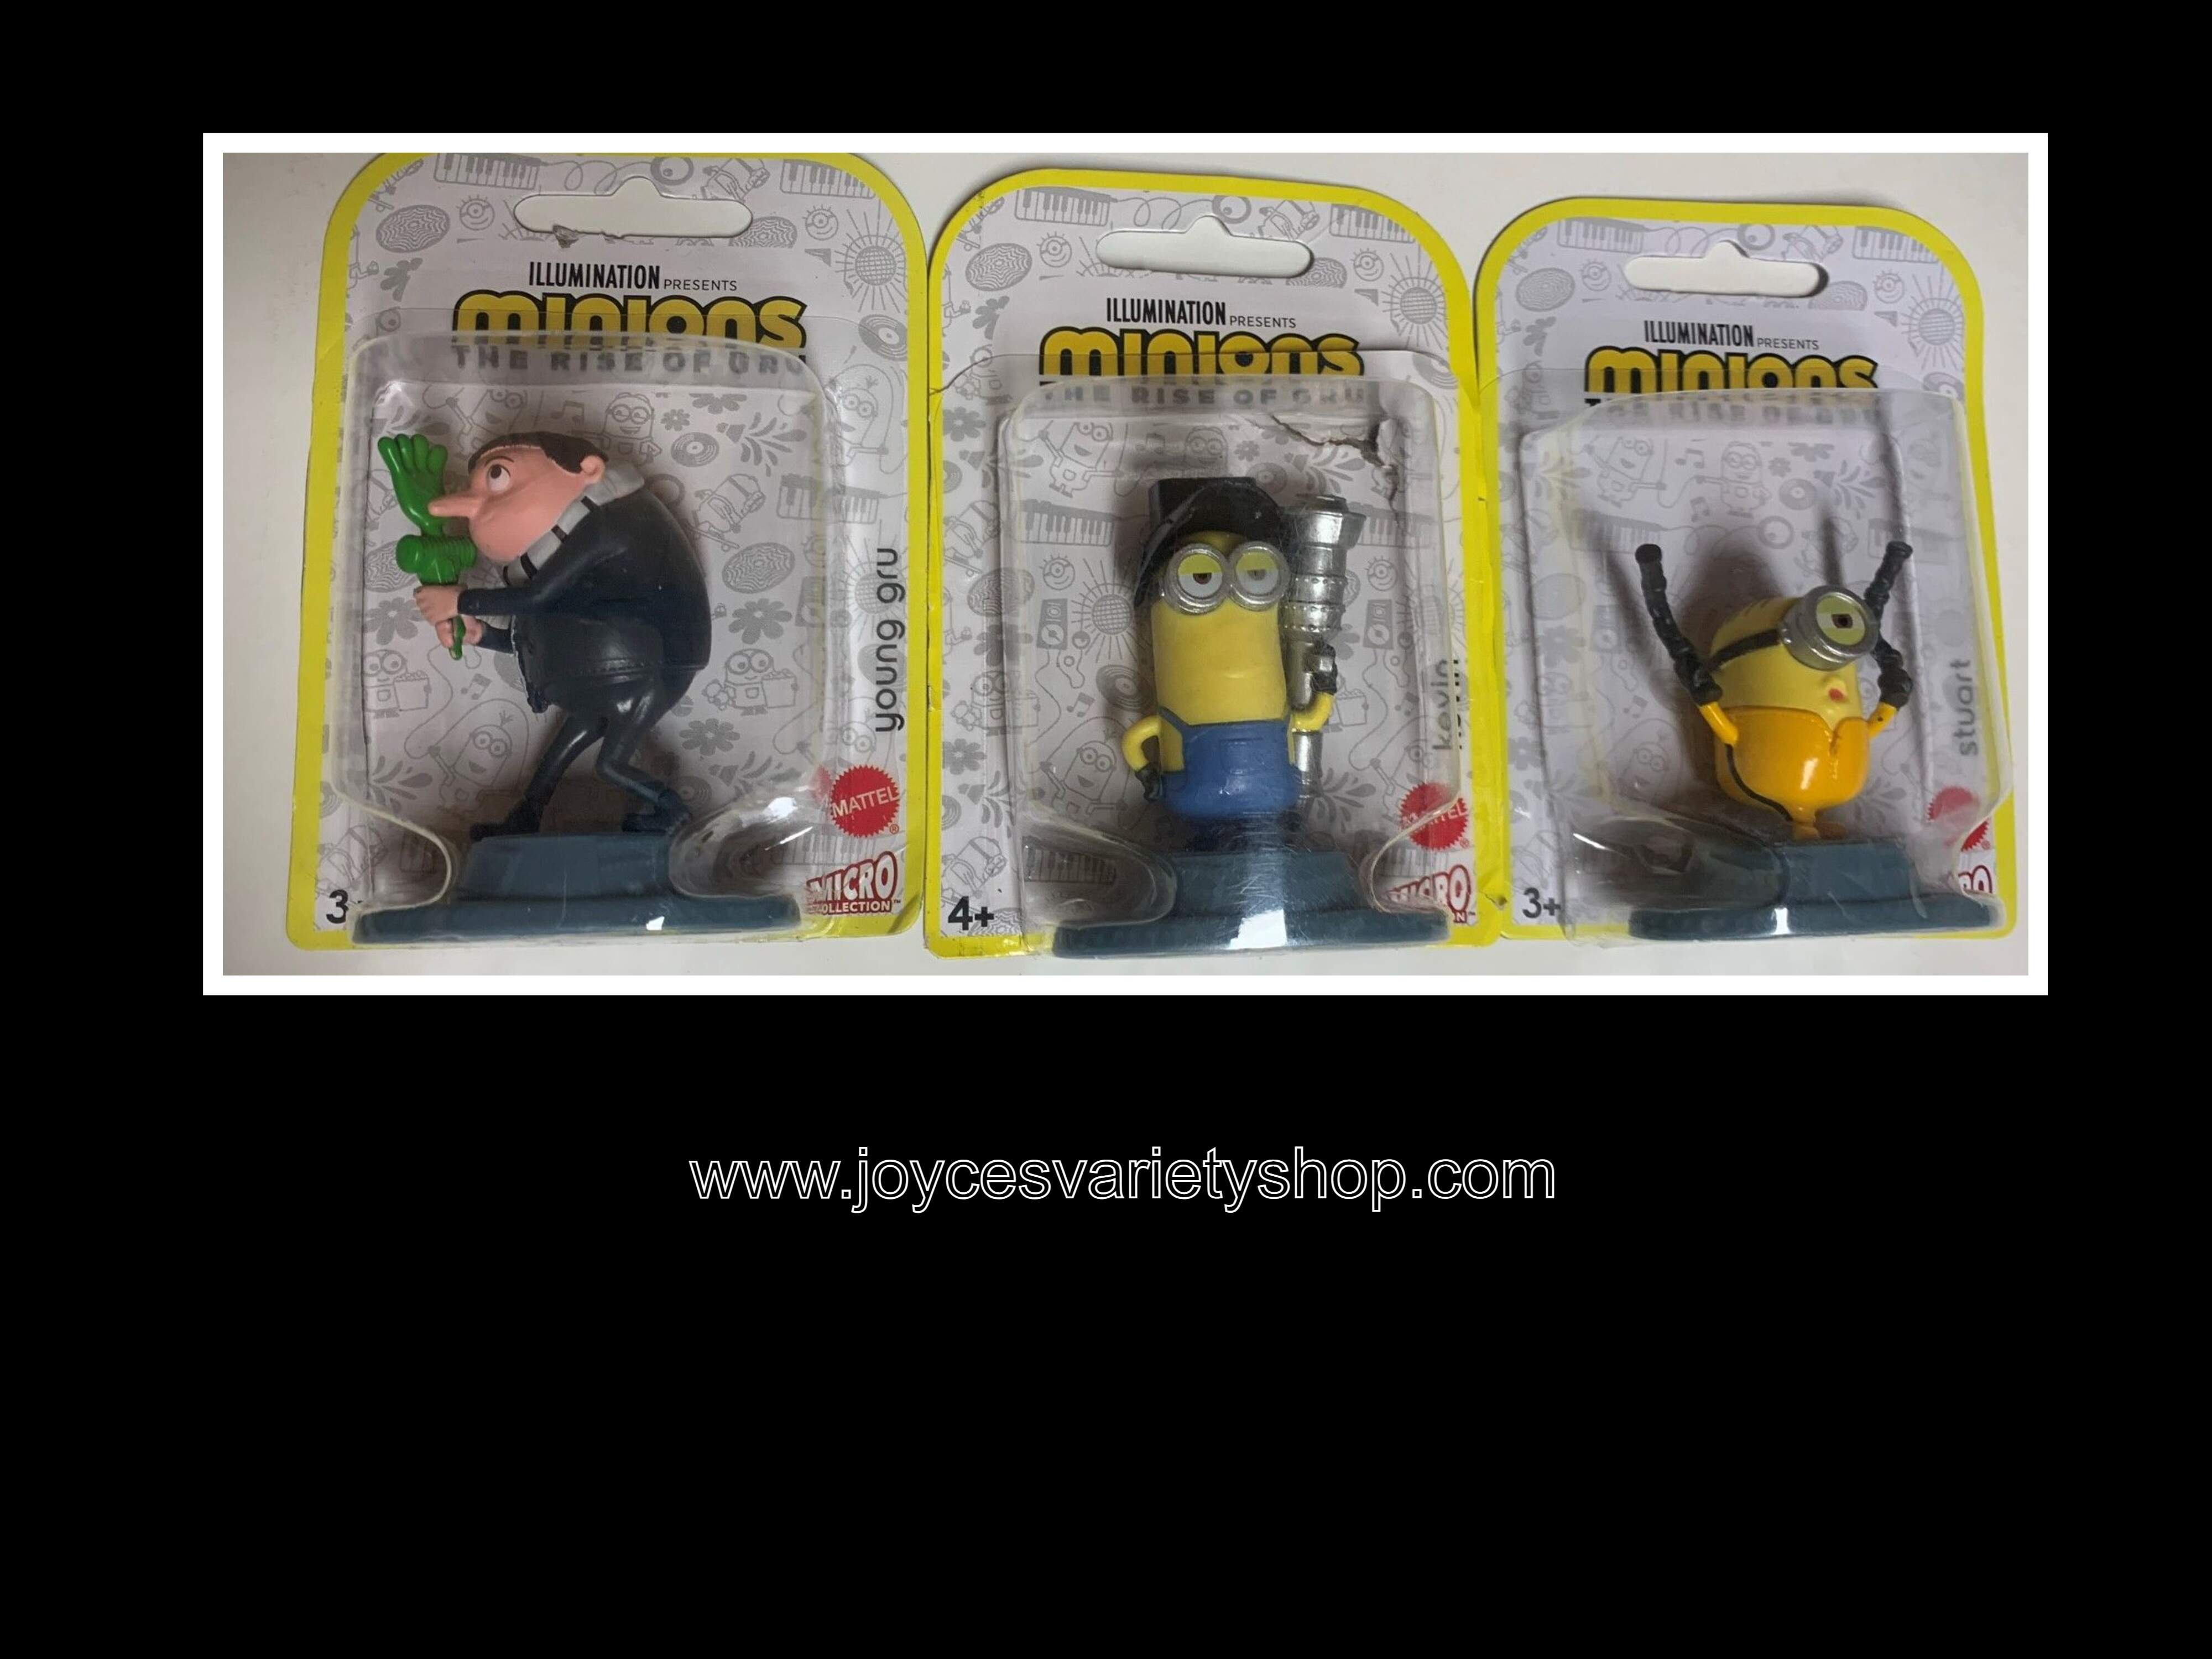 Minions The Rise of Gru Movie Characters Micro Collection 3 PC Figure Set